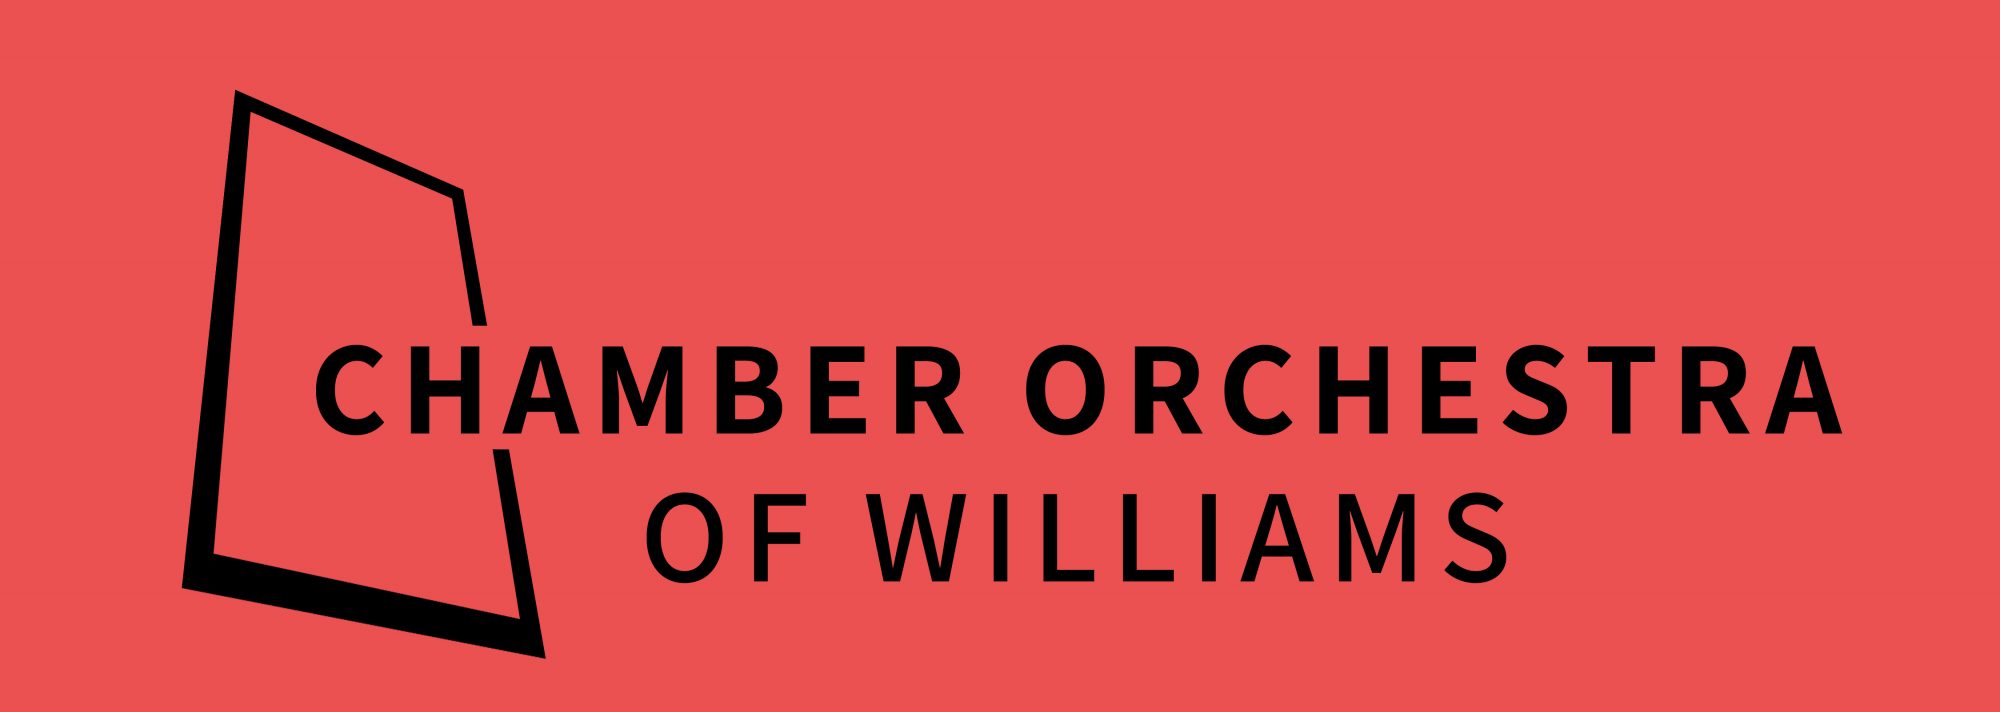 CHAMBER ORCHESTRA OF WILLIAMS